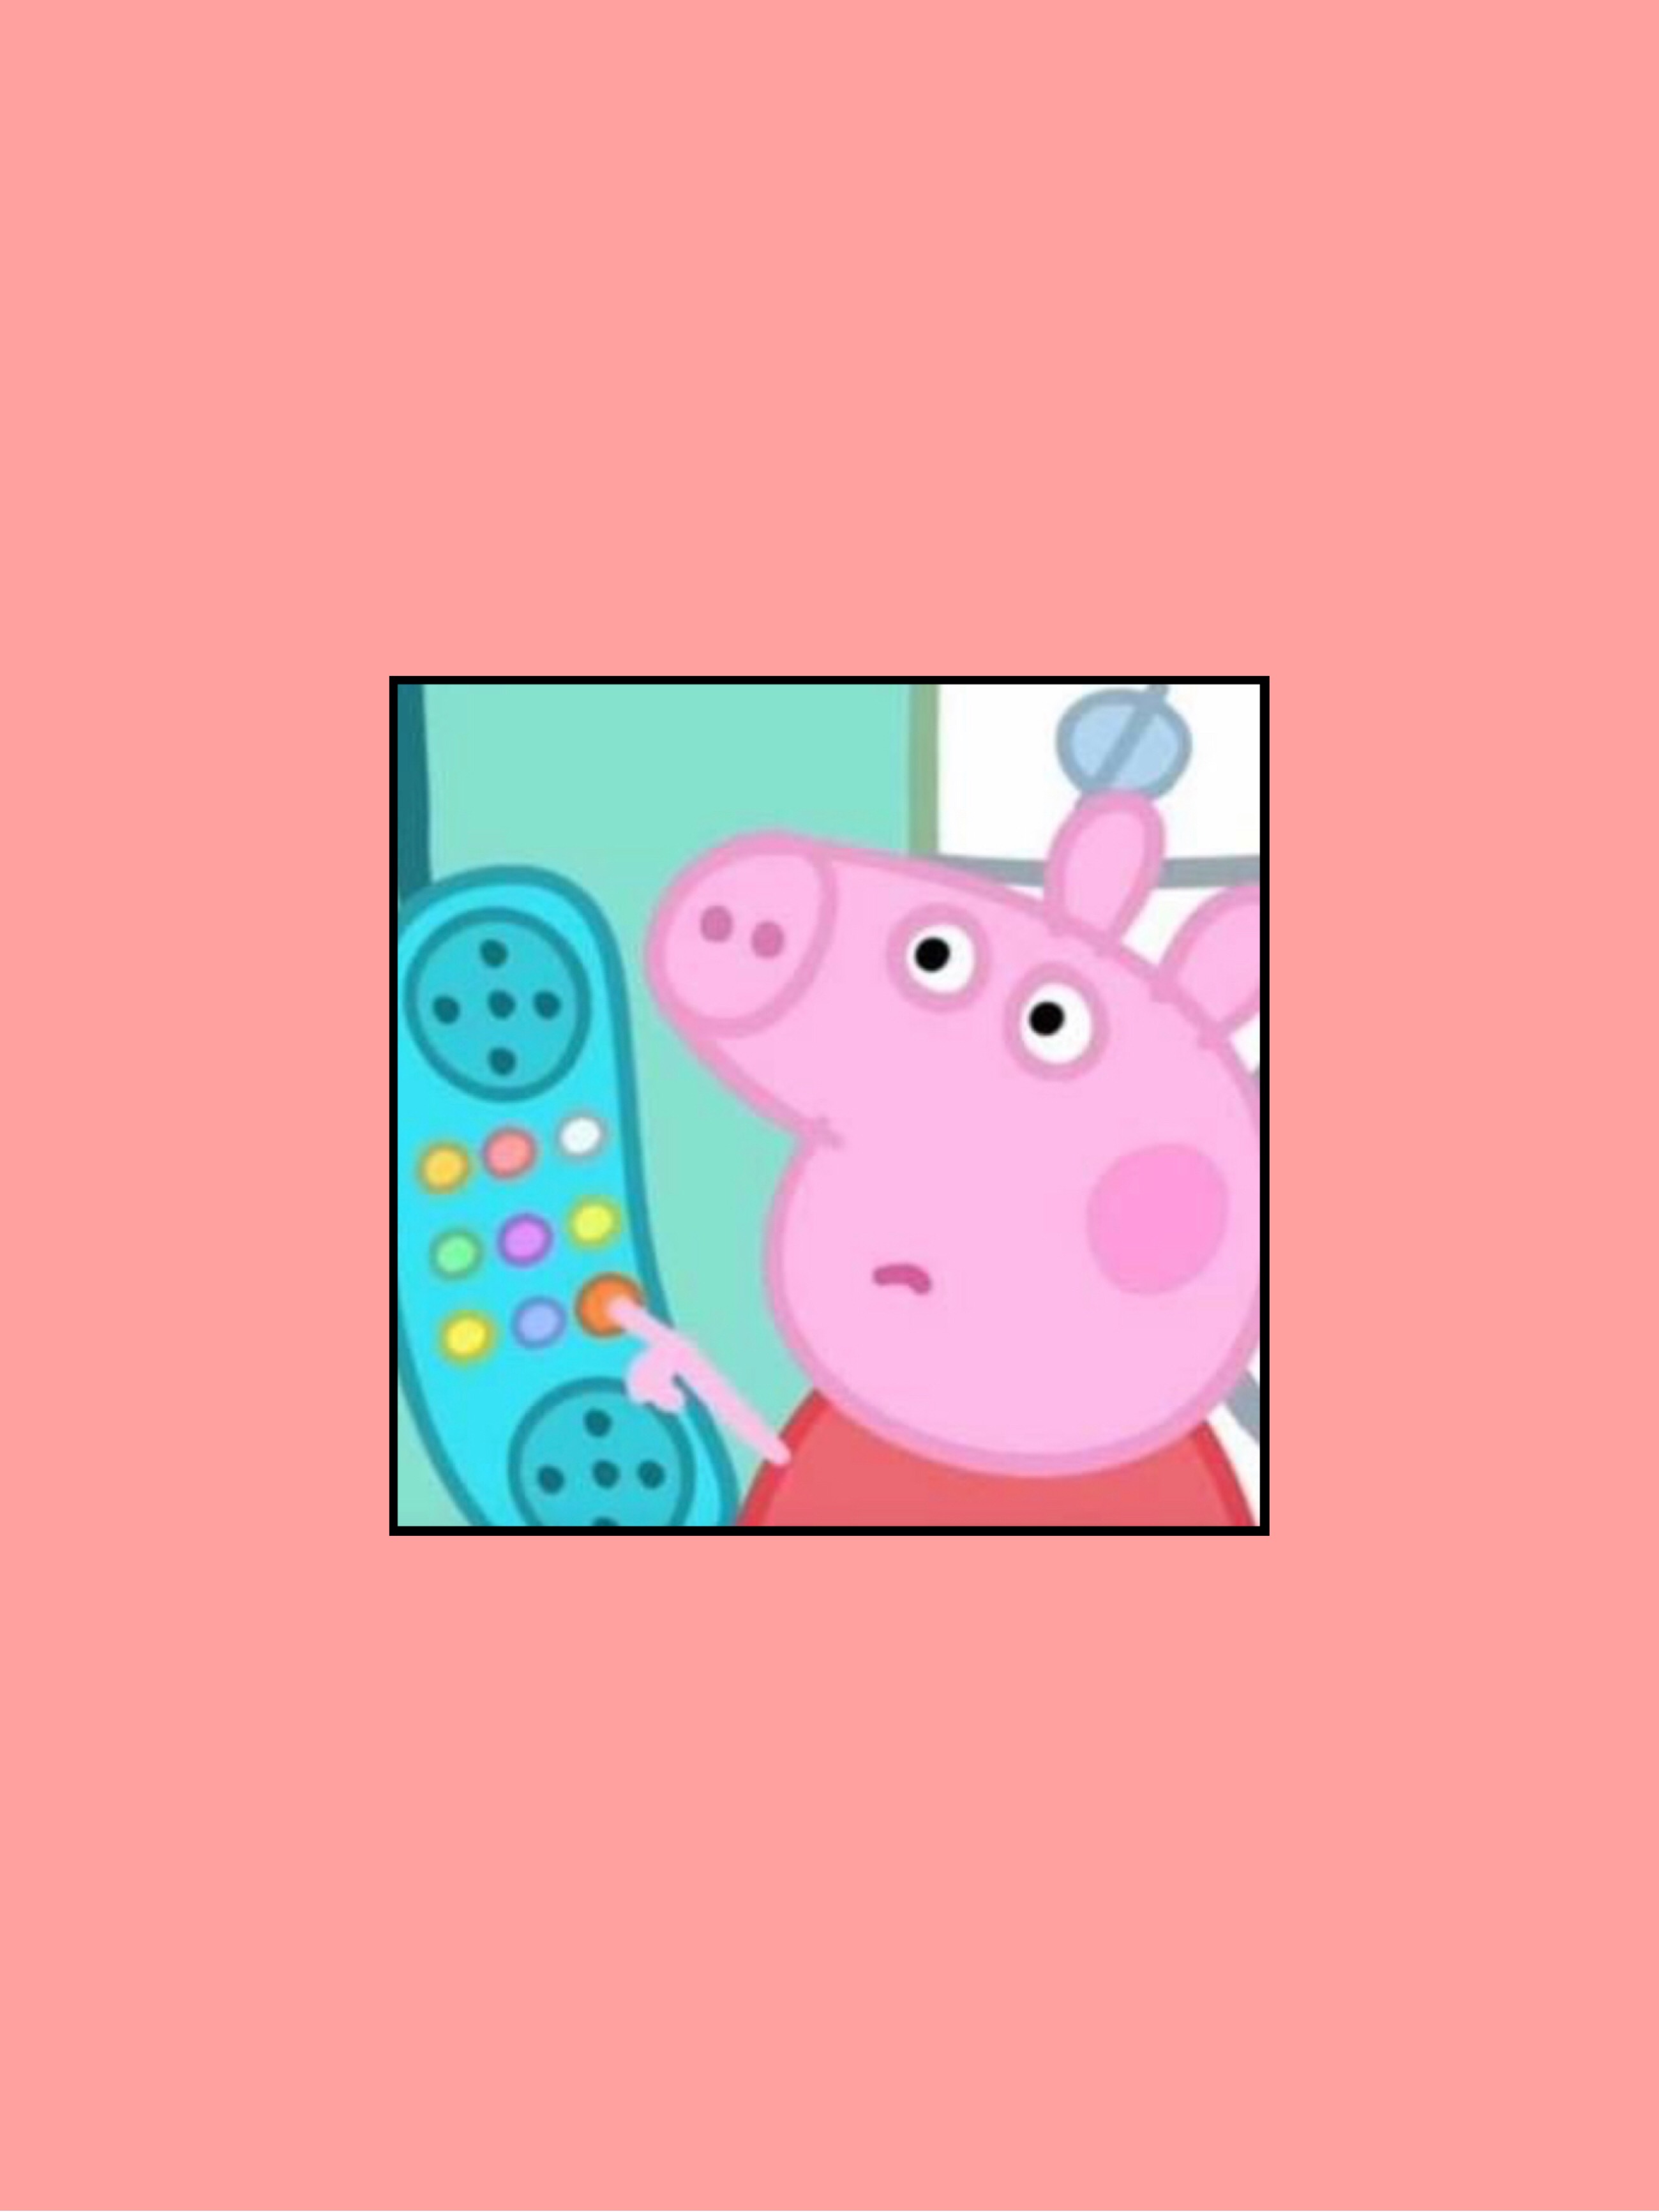 Peppa What Are You Doing On My Iphone Wallpaper
••••♥︎•••• - Peppa What Are You Doing In My - HD Wallpaper 